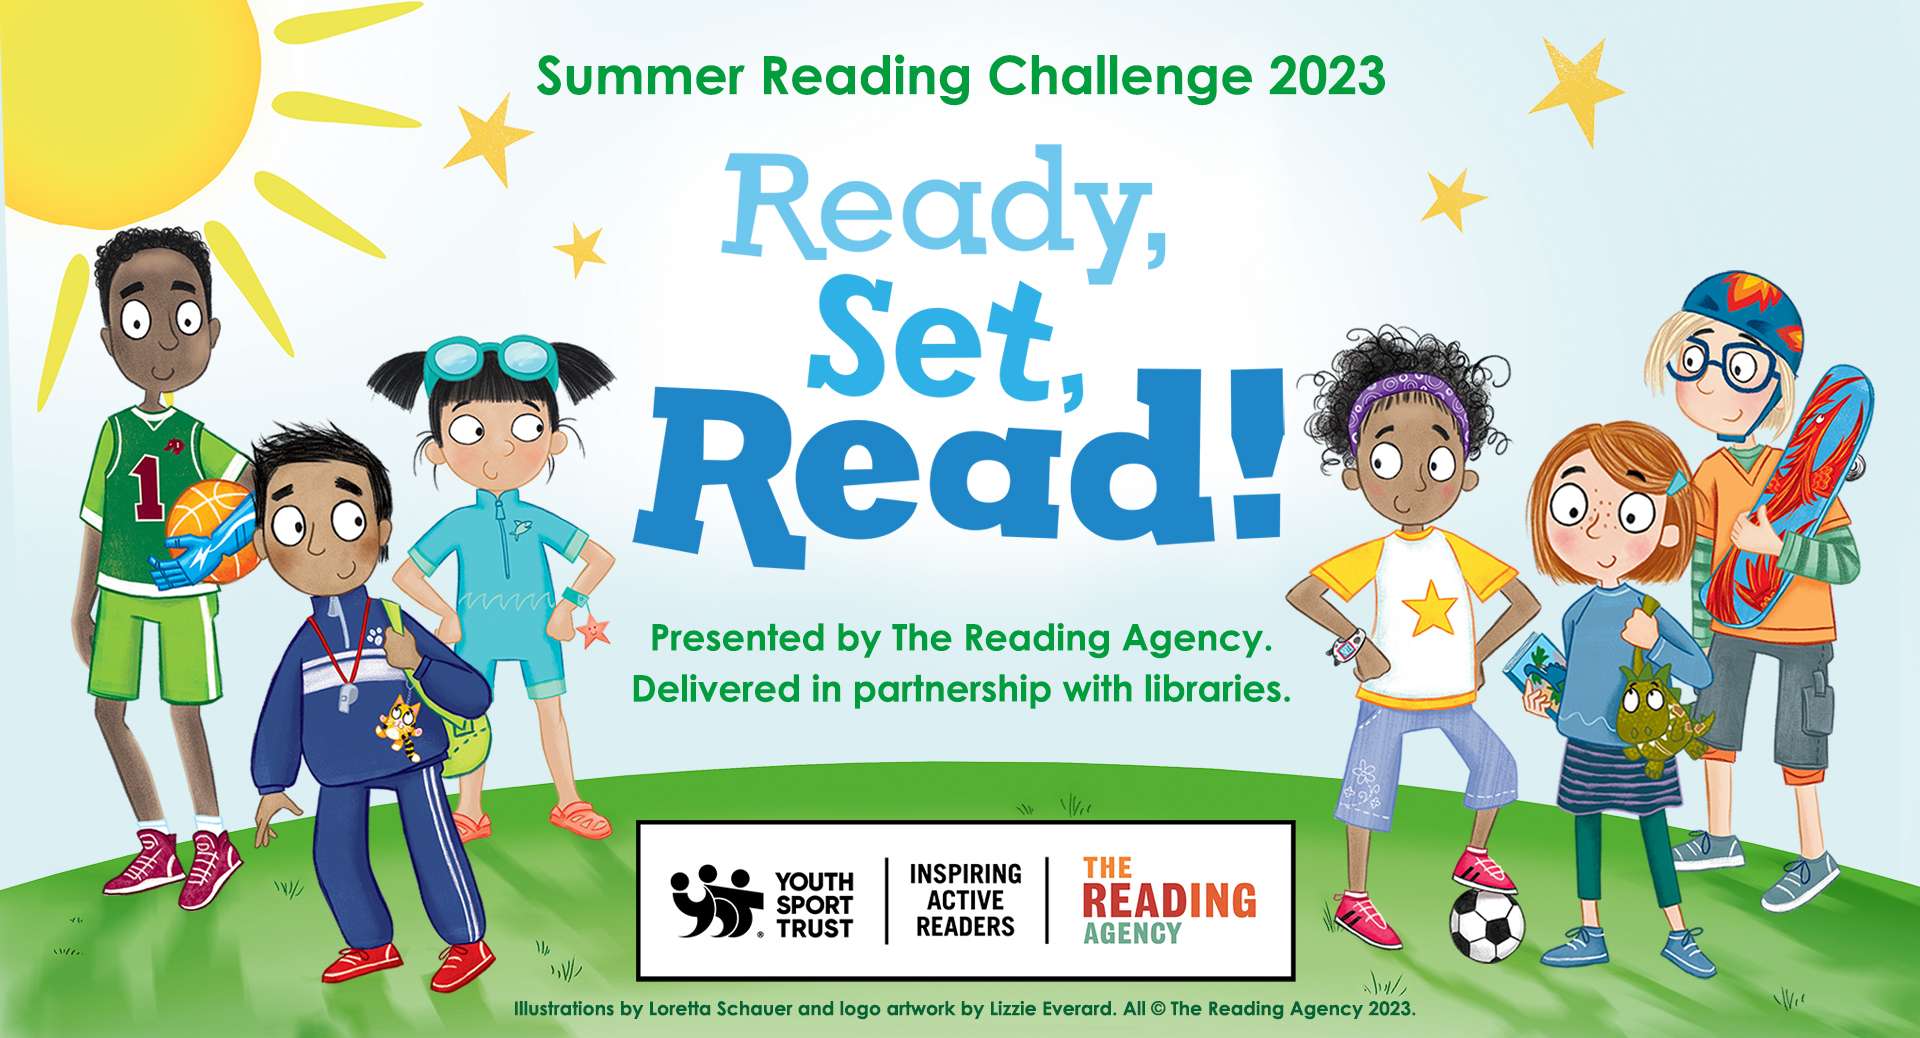 Summer Reading Challenge 2023 - Ready, Set, Read! Presented by The Reading Agency. Delivered in partnership with libraries